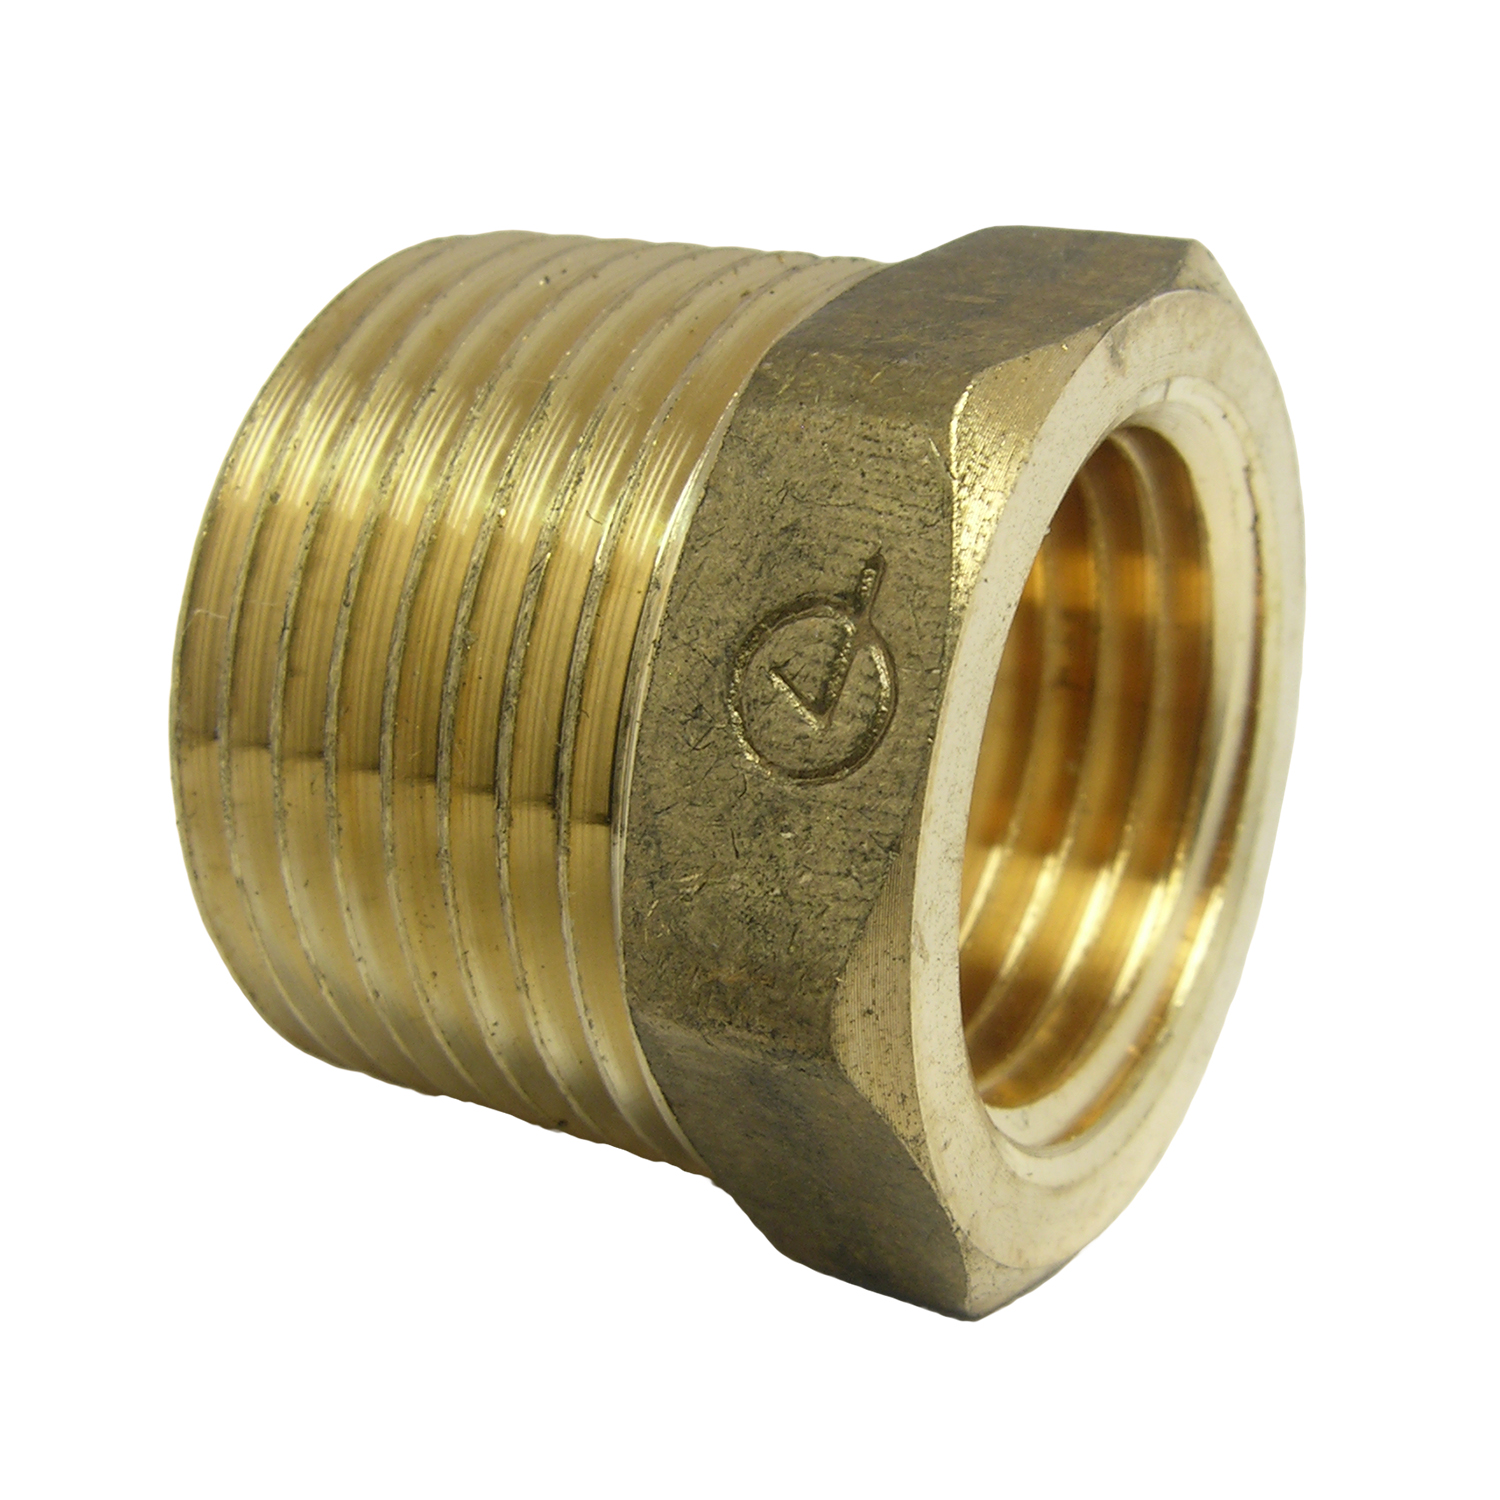 17-9259 Hex Pipe Bushing, 3/4 x 1/2 in, MPT x FPT, Brass, 125 psi Pressure